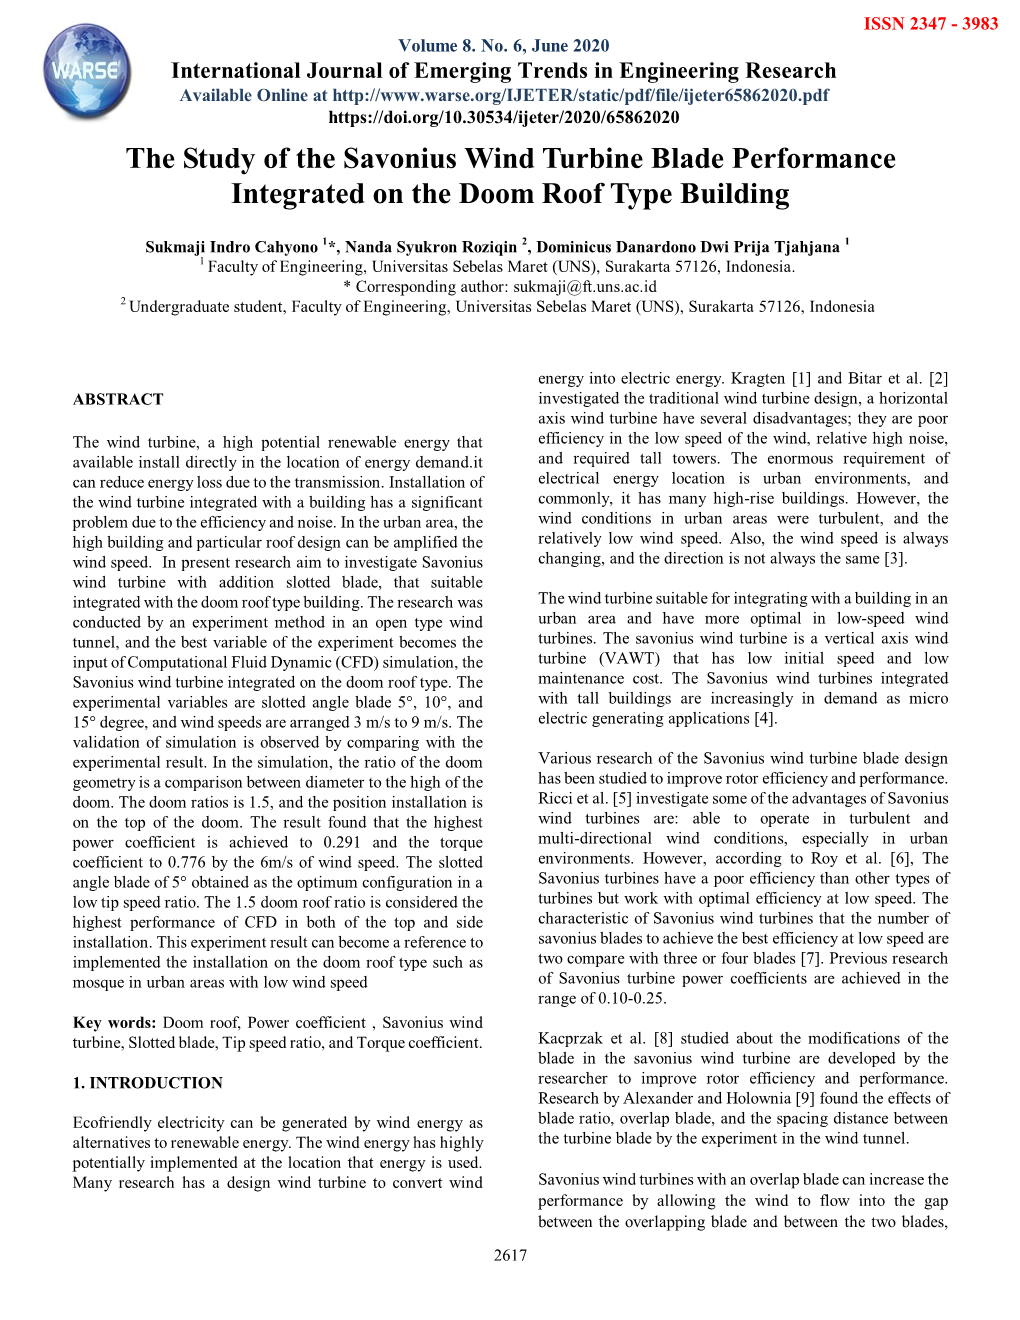 The Study of the Savonius Wind Turbine Blade Performance Integrated on the Doom Roof Type Building